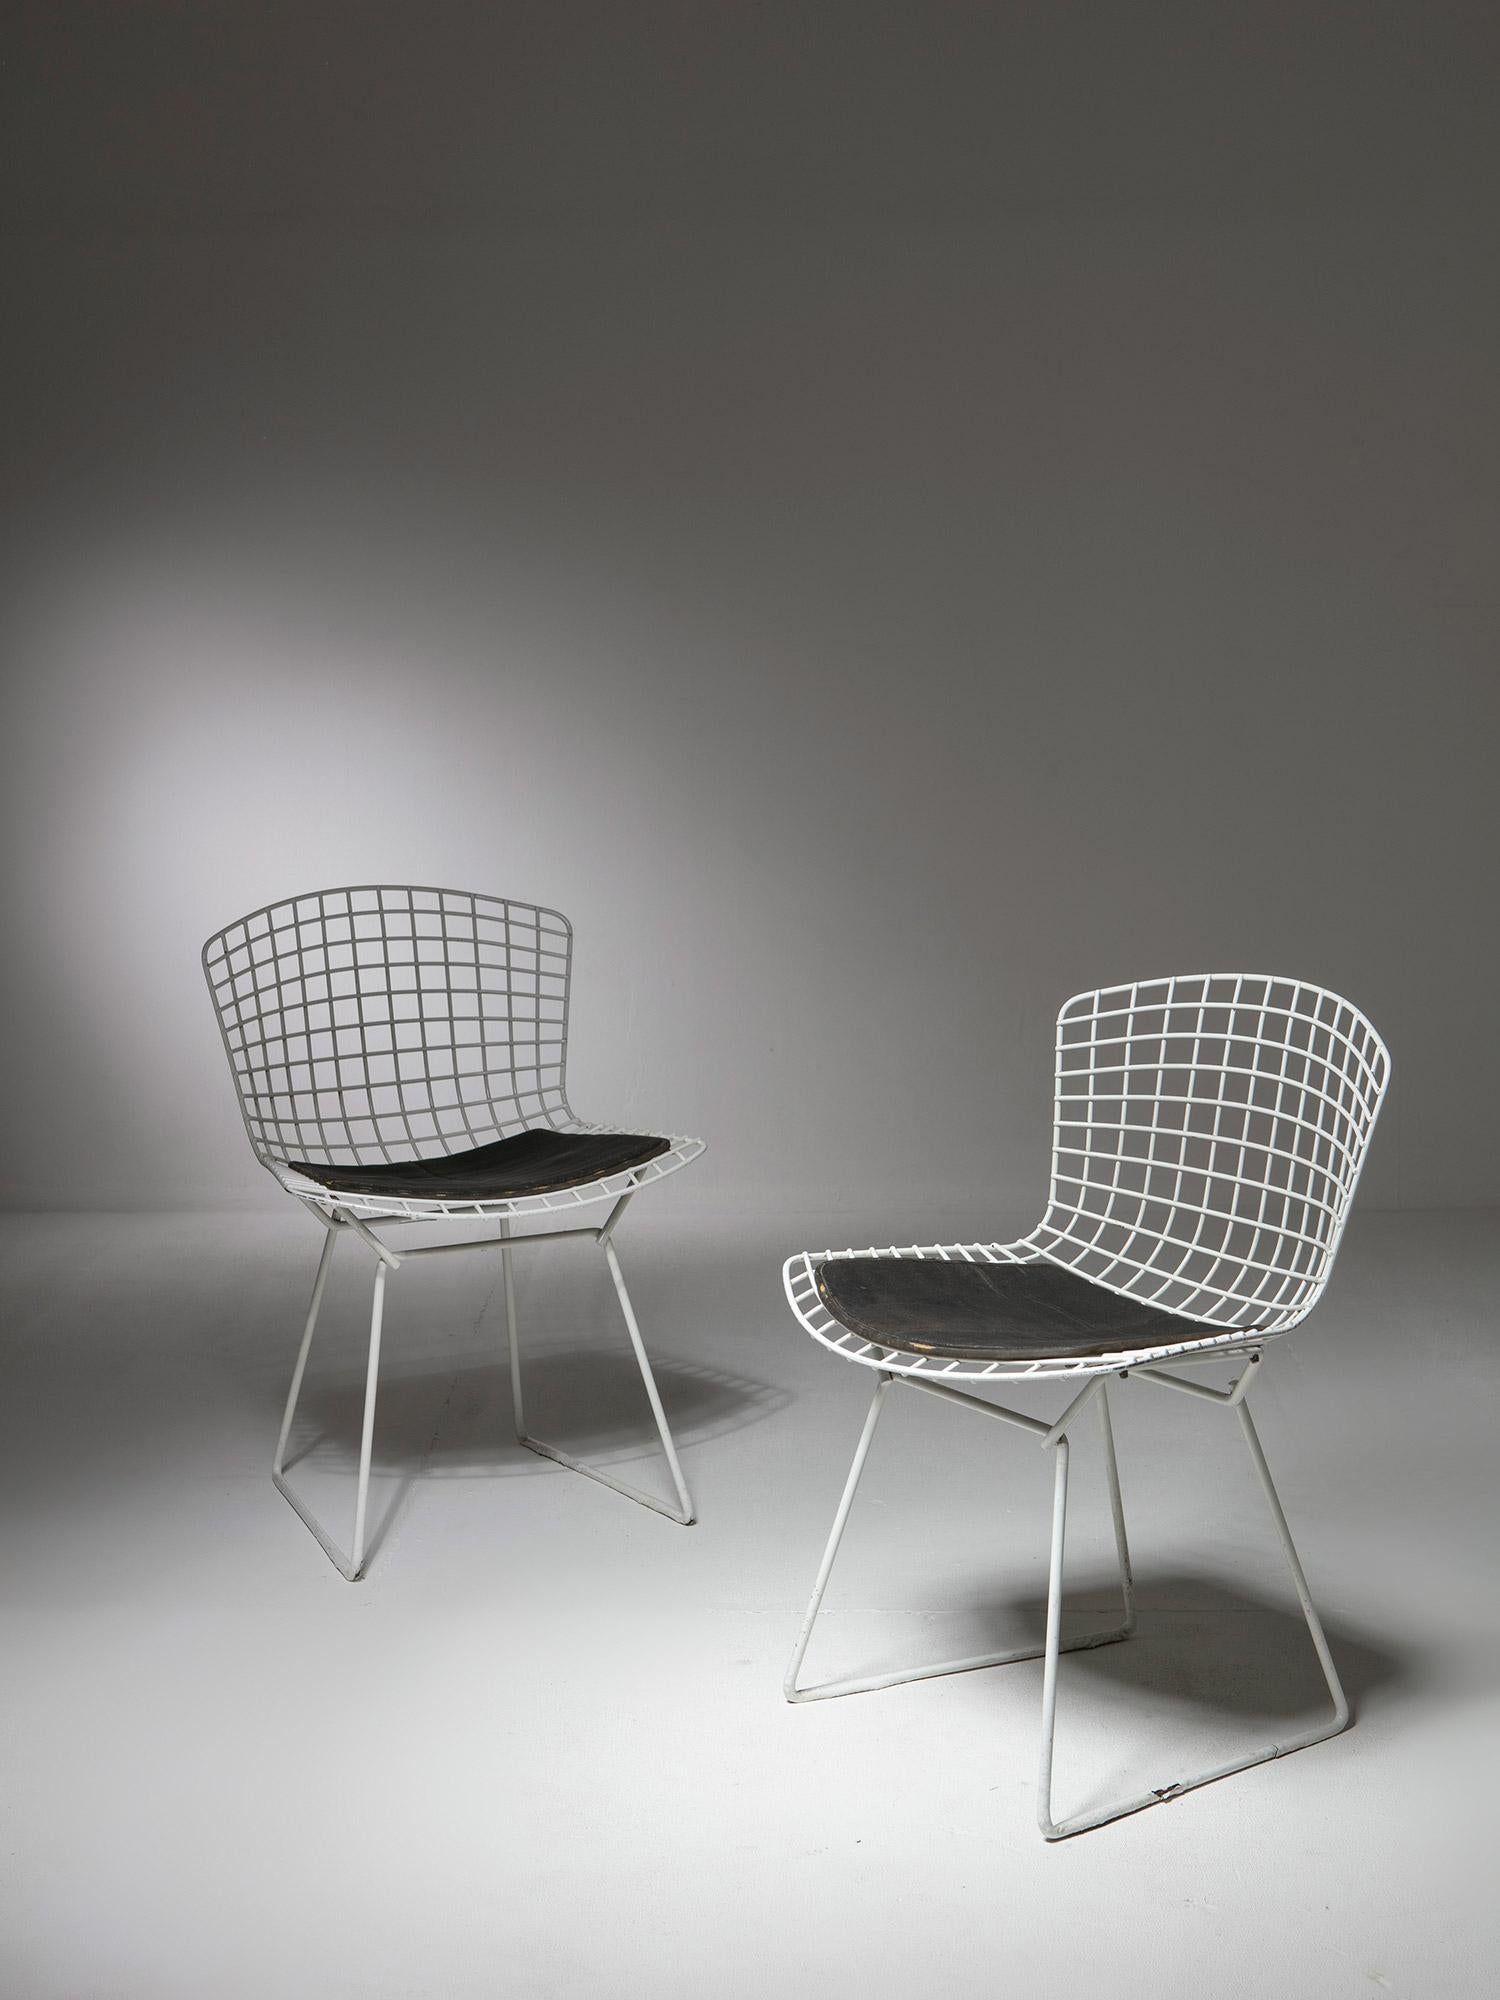 Set of two Model 420 side chairs by Harry Bertoia for Knoll.
Early edition with white metal frame and black seat pad.